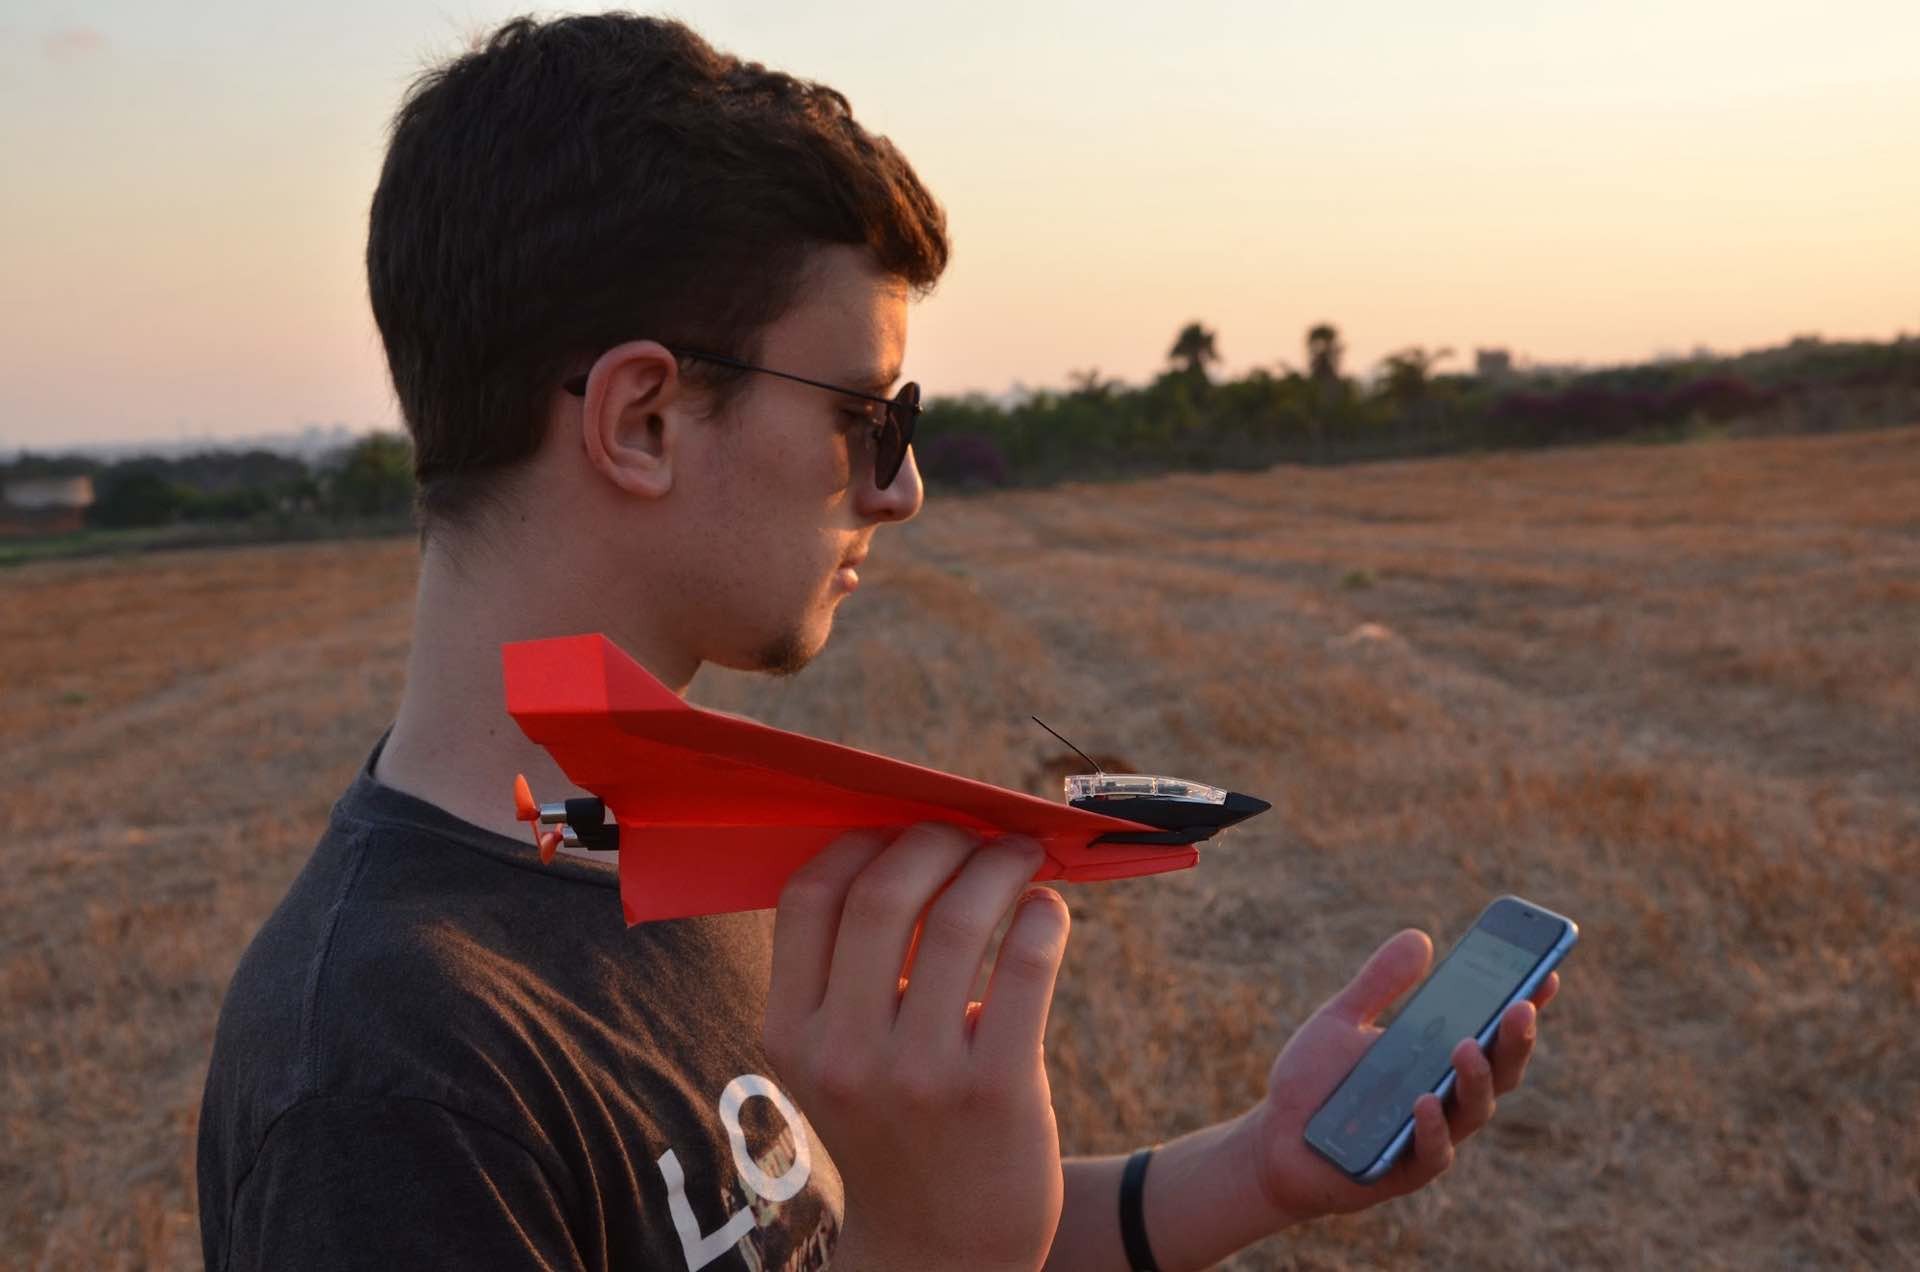 powerup-4-0-smartphone-controlled-paper-airplane-kit-lifestyle